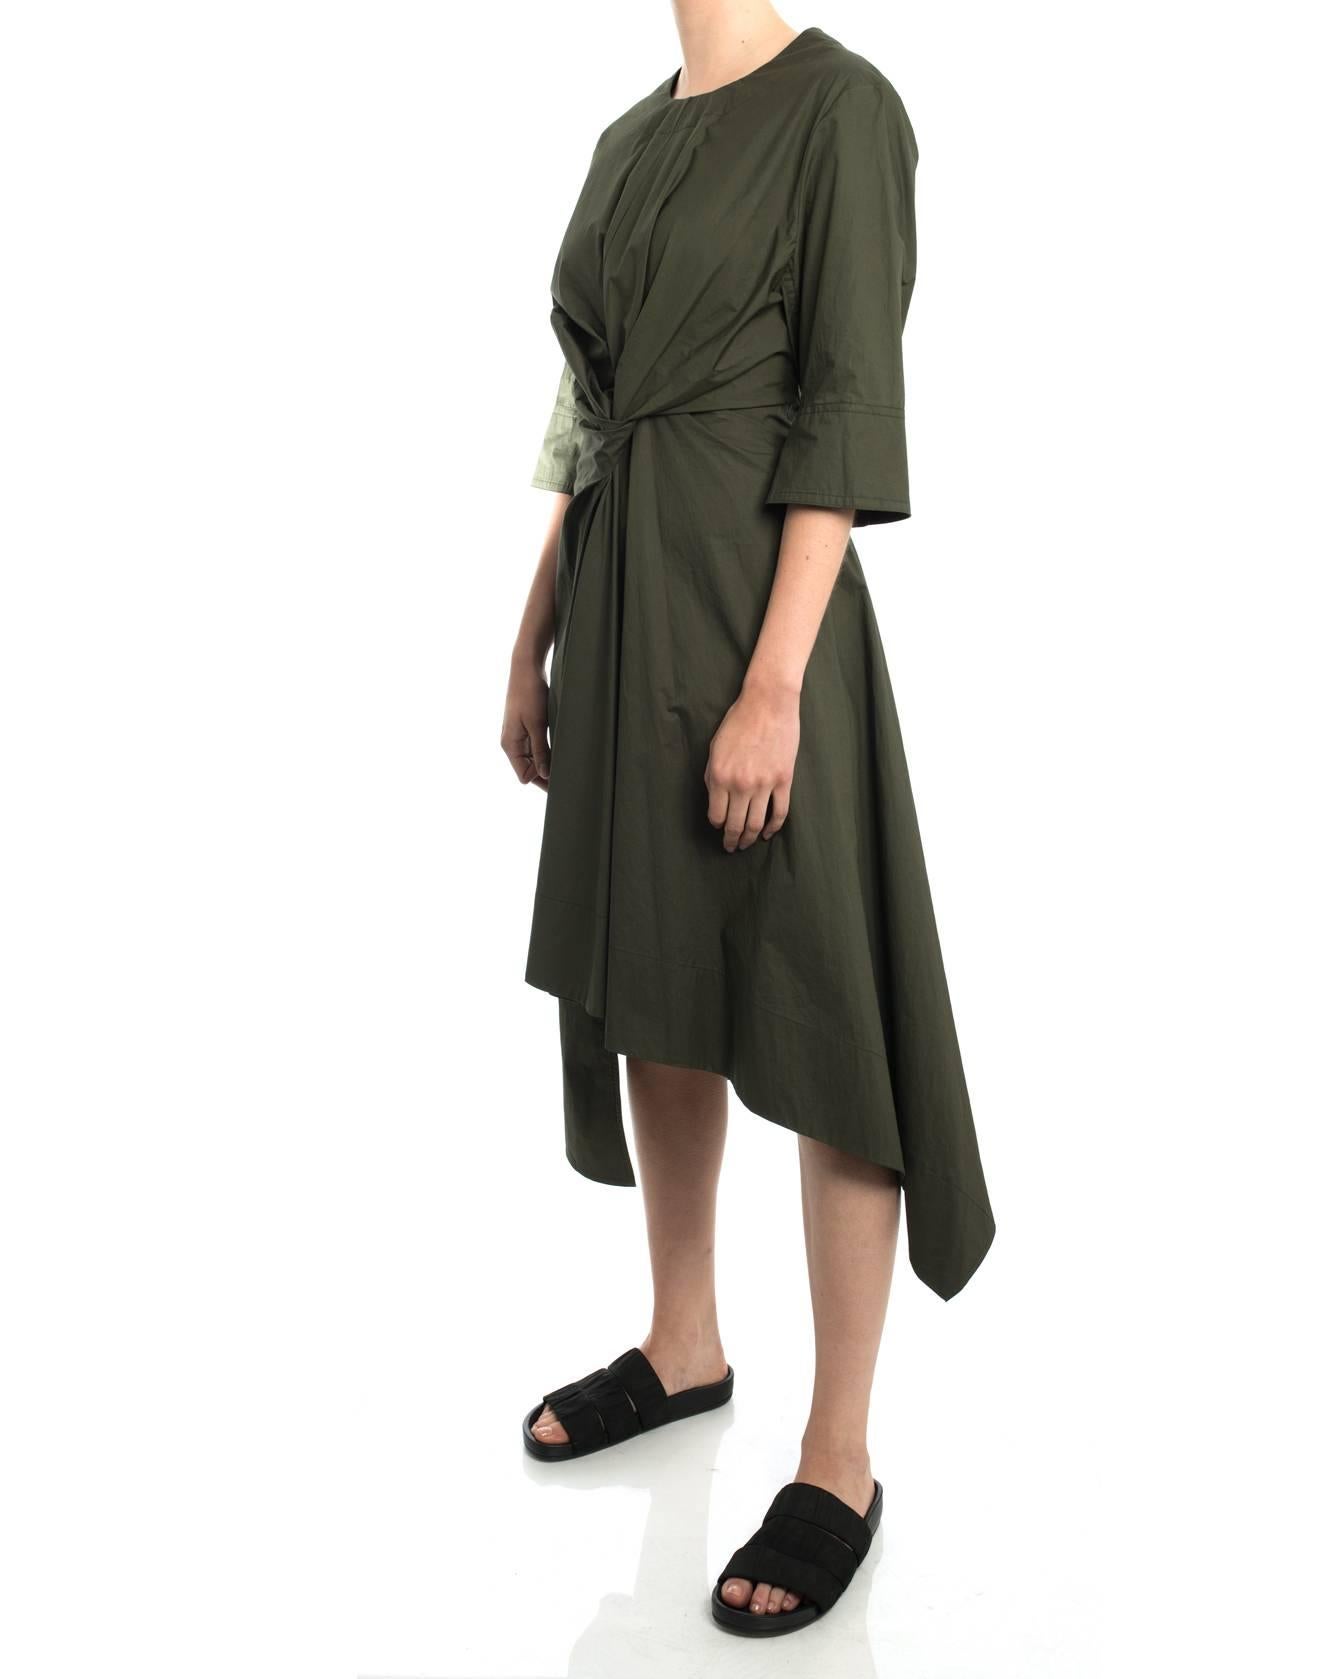 Black Marni Olive Green Cotton Knotted Dress with Asymetrical Hem - 8